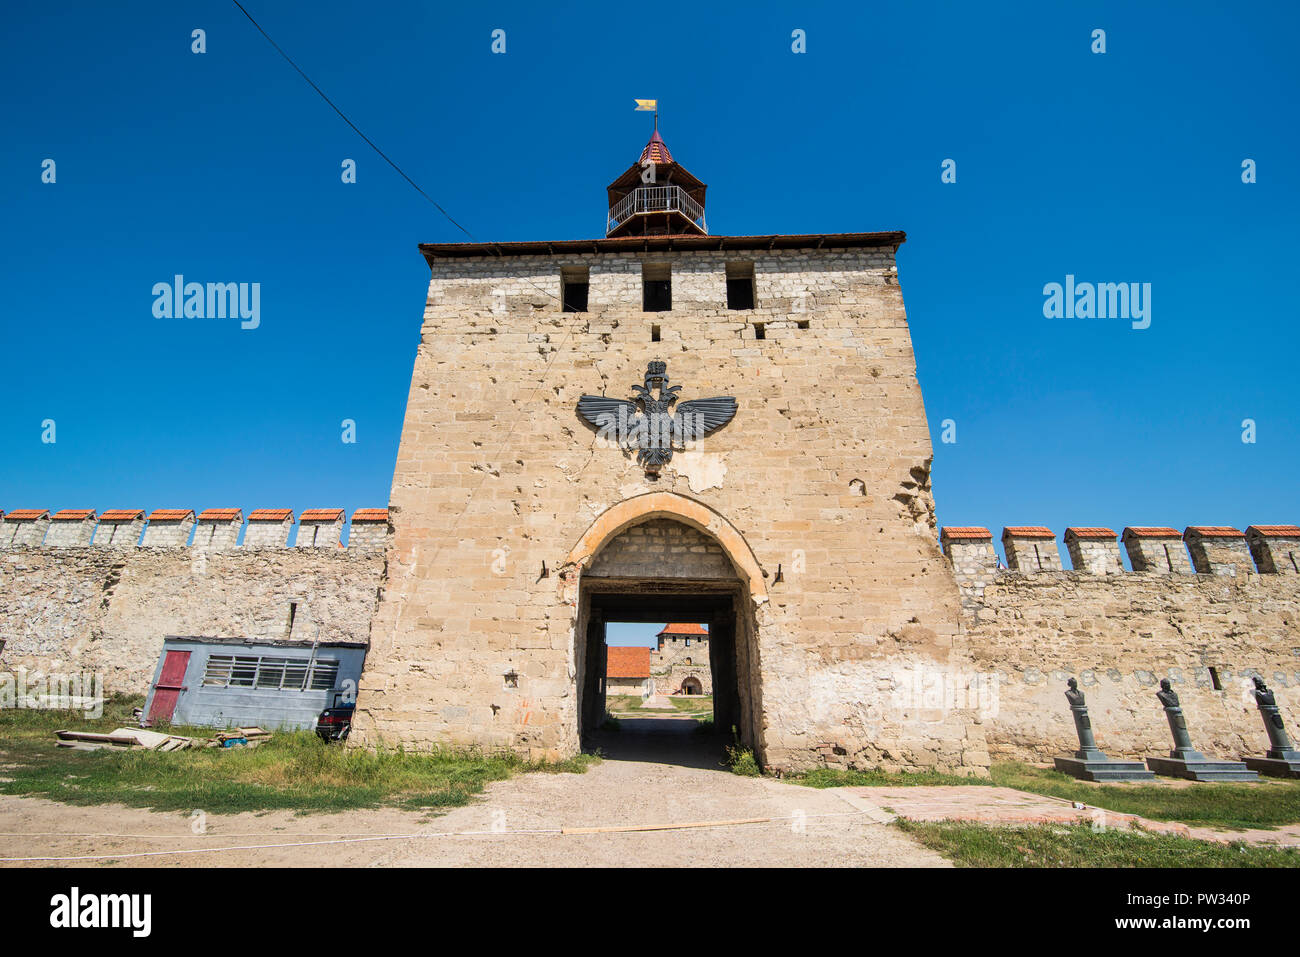 Entrance gate to the Bender fortress, Bender, Republic of Transnistria, Moldova Stock Photo